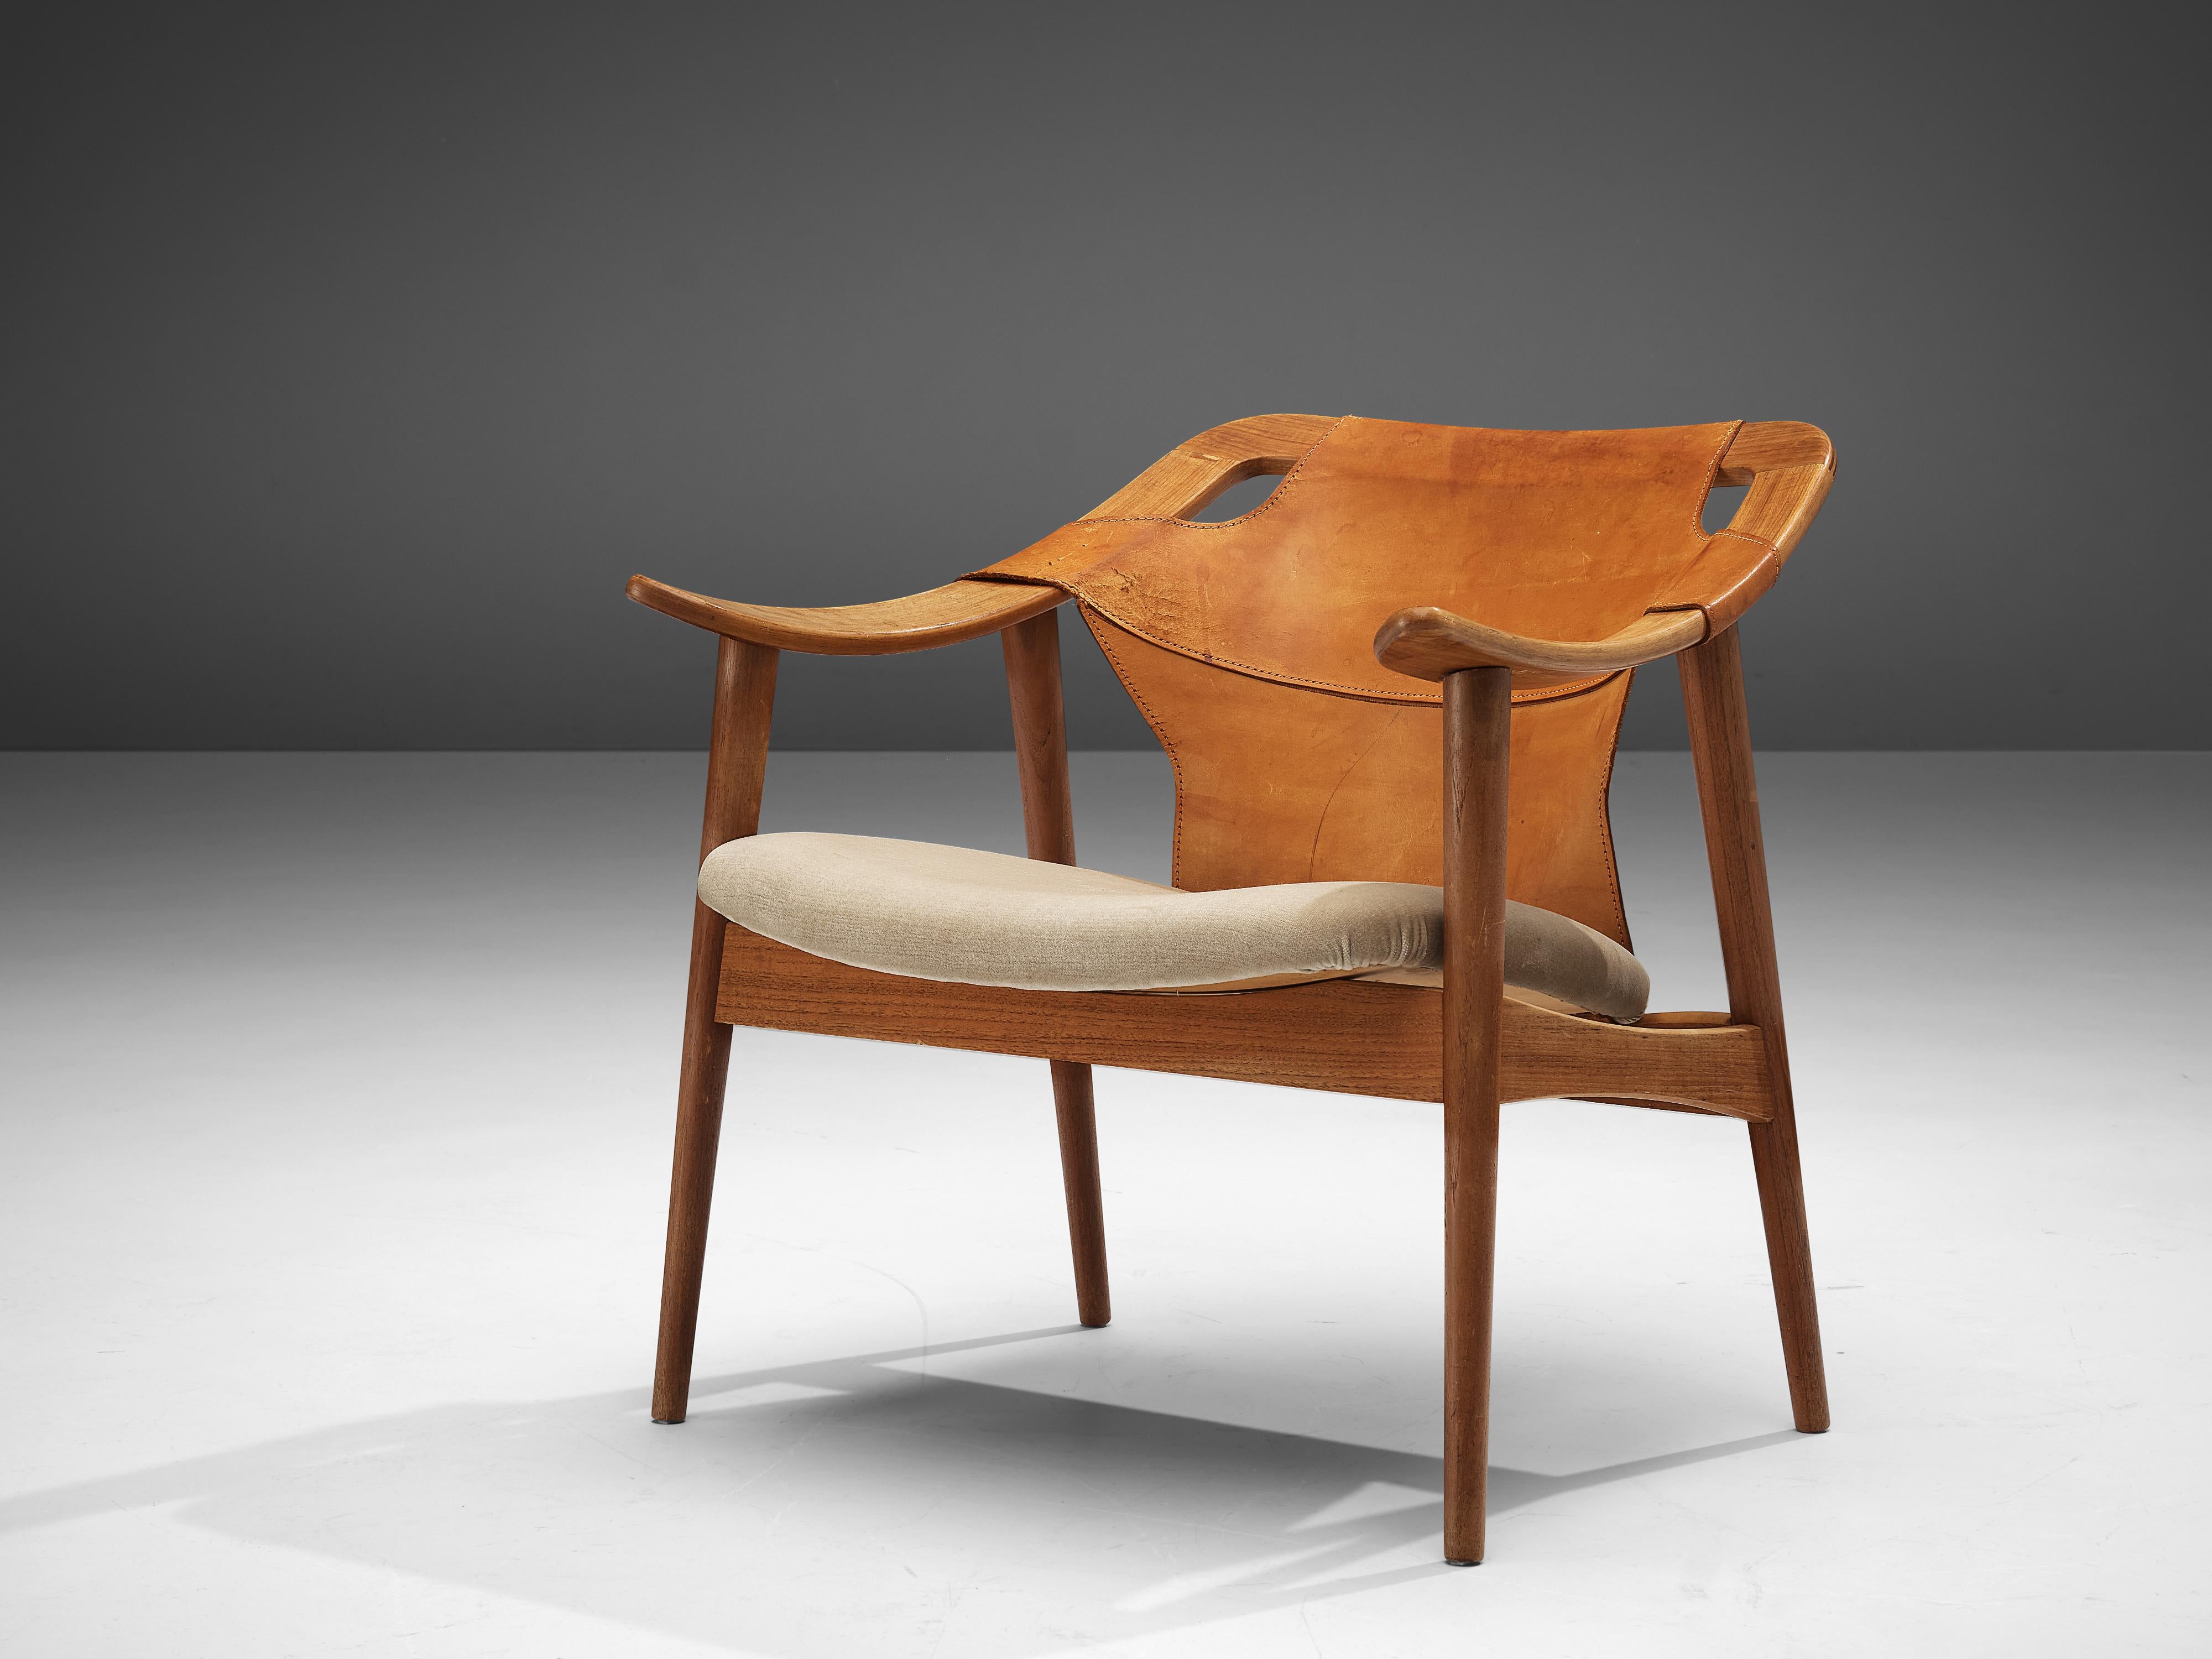 Arne Tidemand Ruud, Armchair, model '3050', oak, leather, fabric, Norway, 1960s.

This easy chair is designed by Norwegian designer Arne Tidemand Ruud. This chair is very dynamic due it's design and shapes. The oak frame shows beautiful curves and